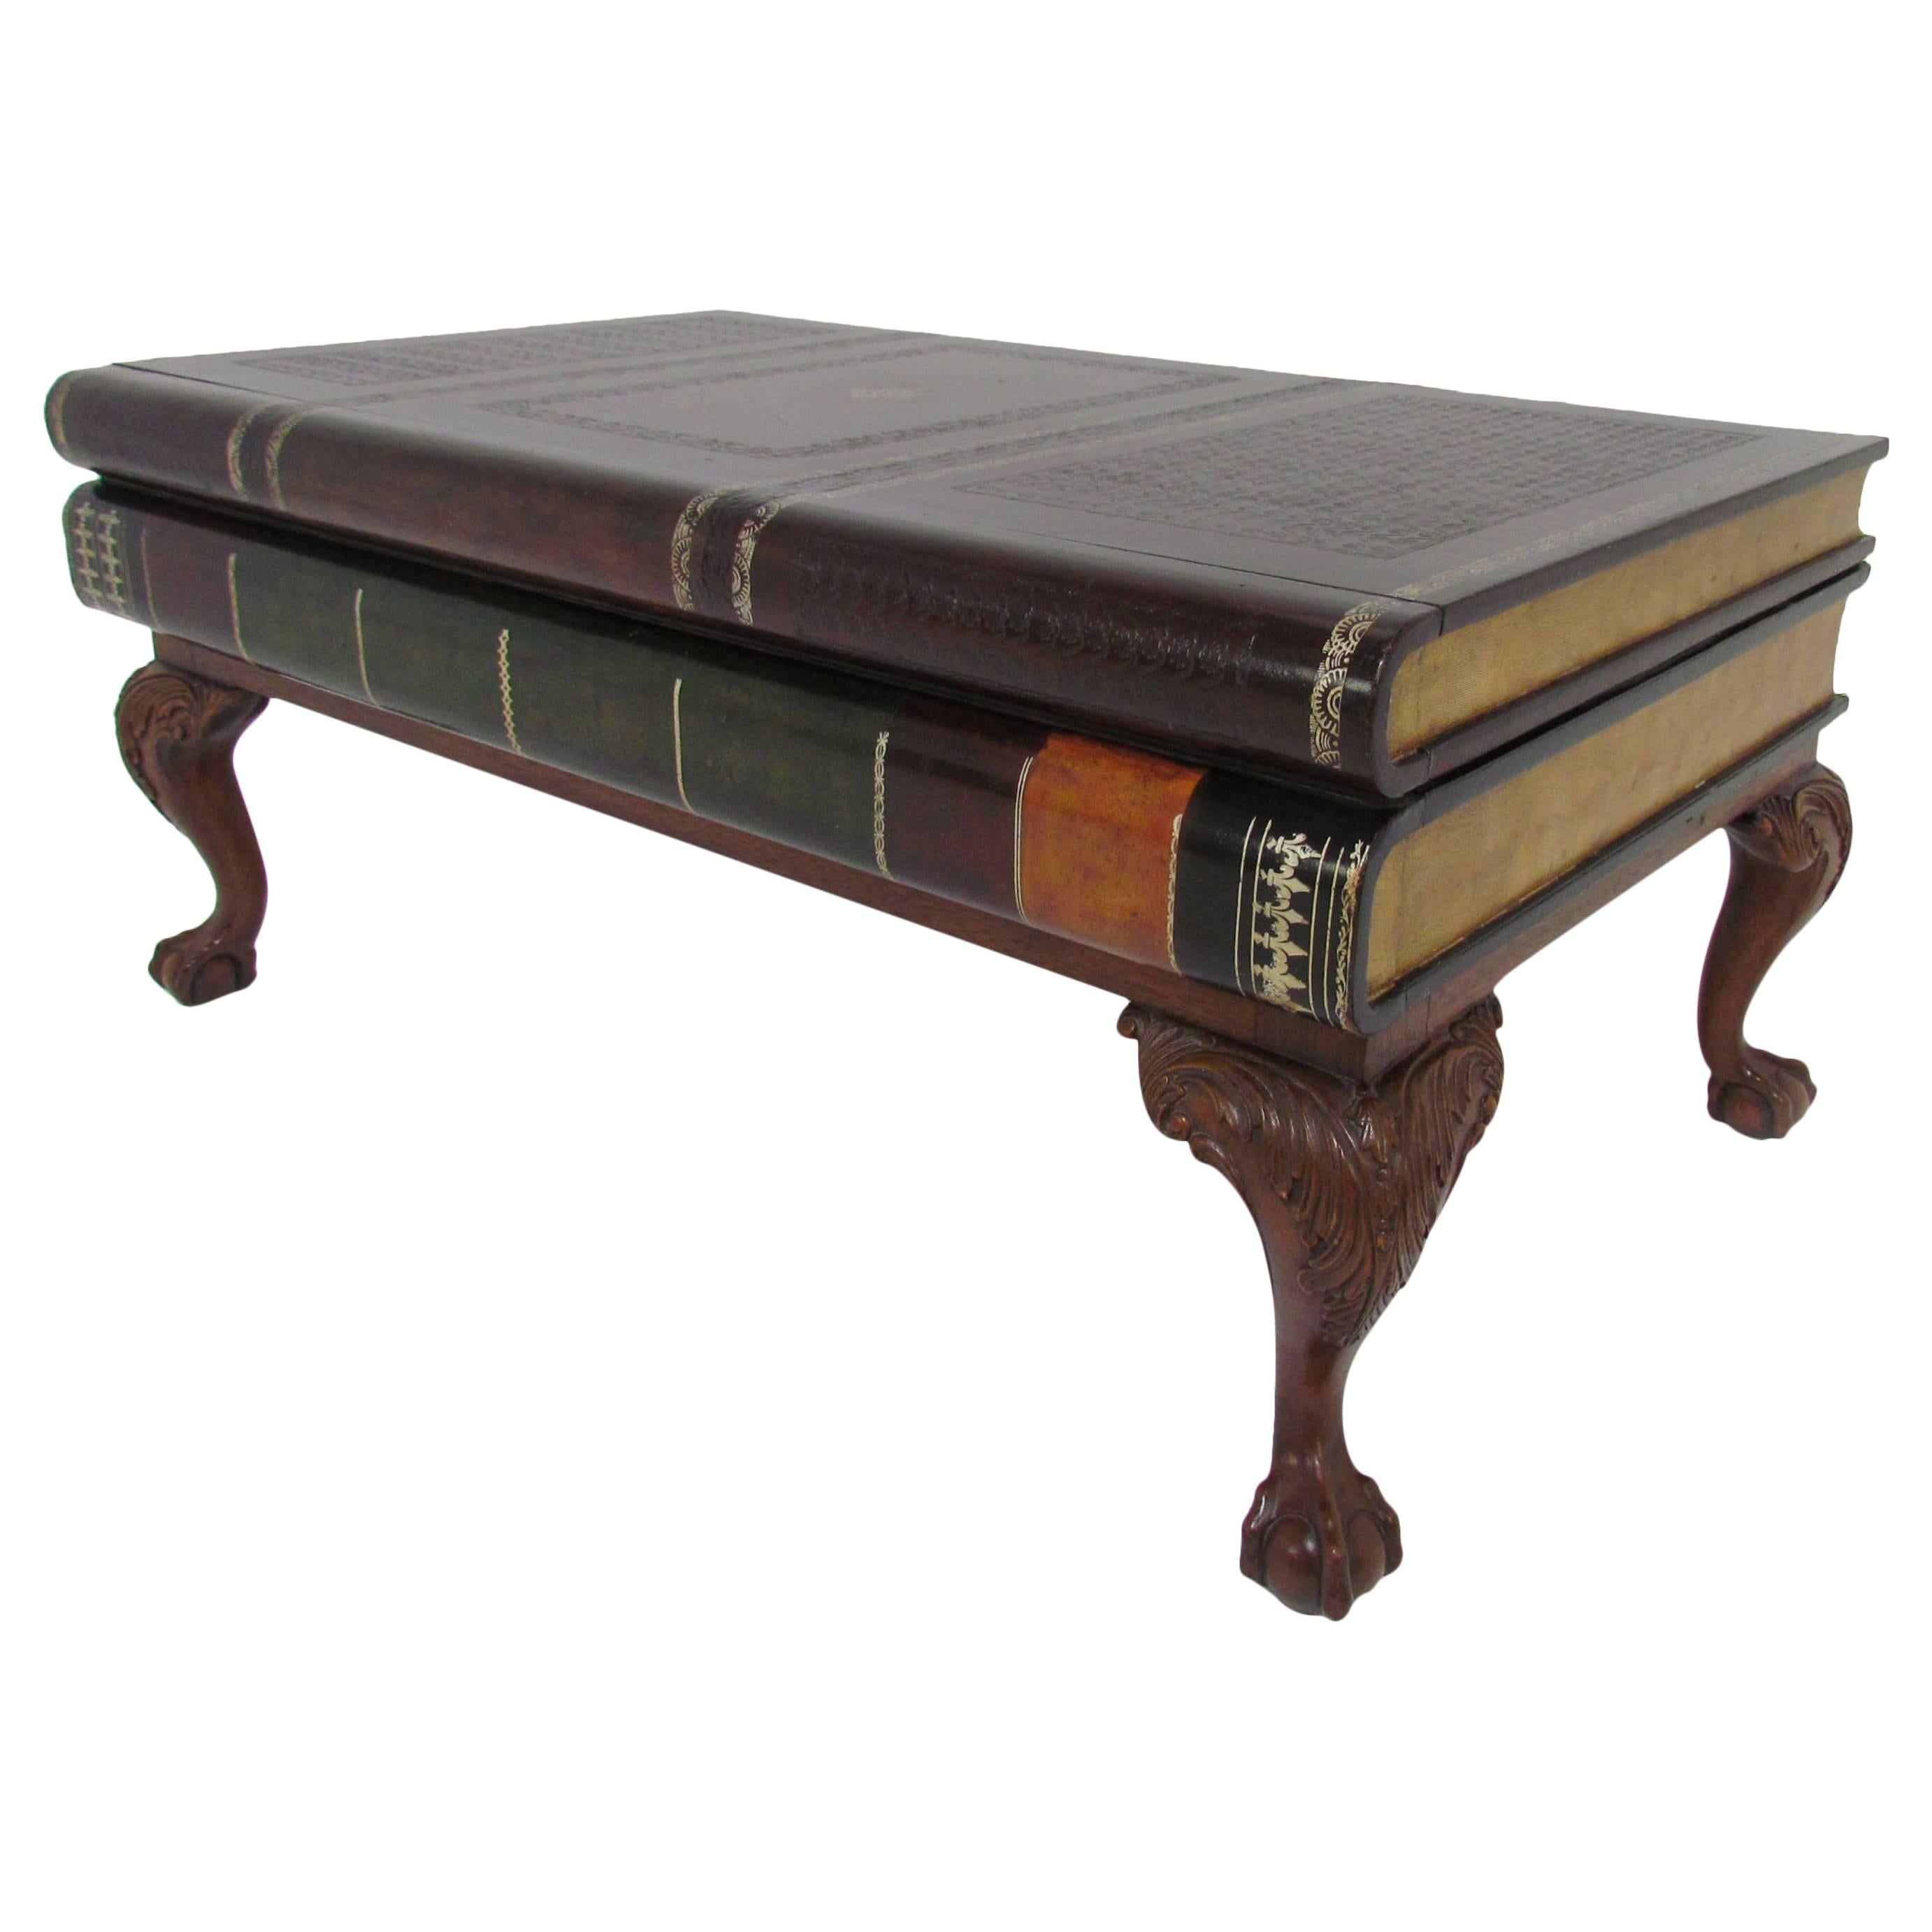 Maitland-Smith Stacked Leather Book-Form Coffee Table